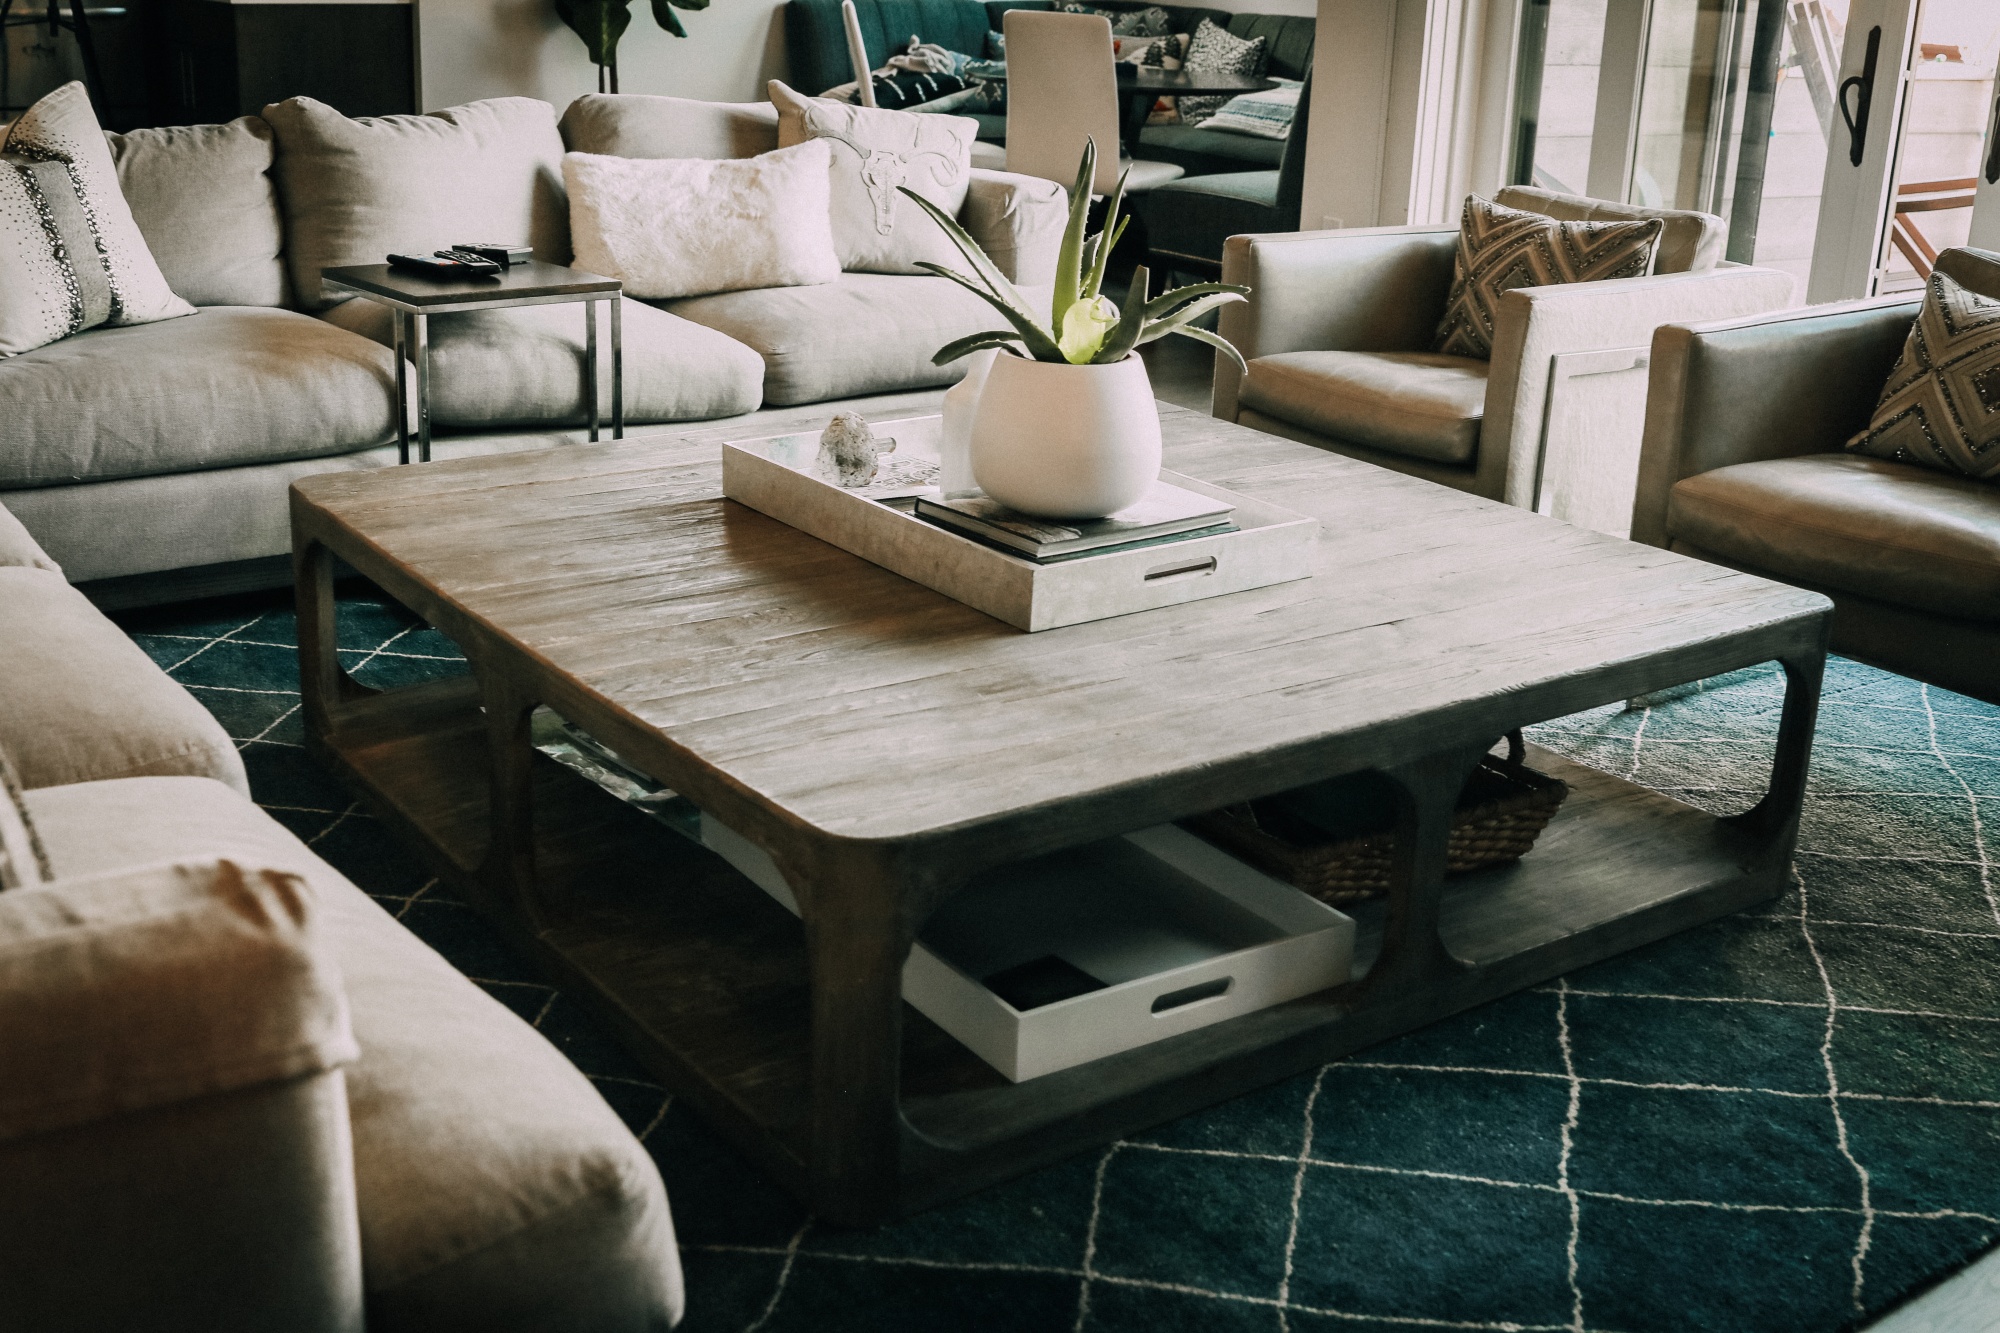 How To Make A Modern Home Cozy, Fashion blogger Erin Busbee of Busbee Style sharing her modern mountain home in Telluride, Colorado and how to make it cozy with pillows, personal touches, comfortable seating, house plants, and more! Including mixing styles with her wooden coffee table